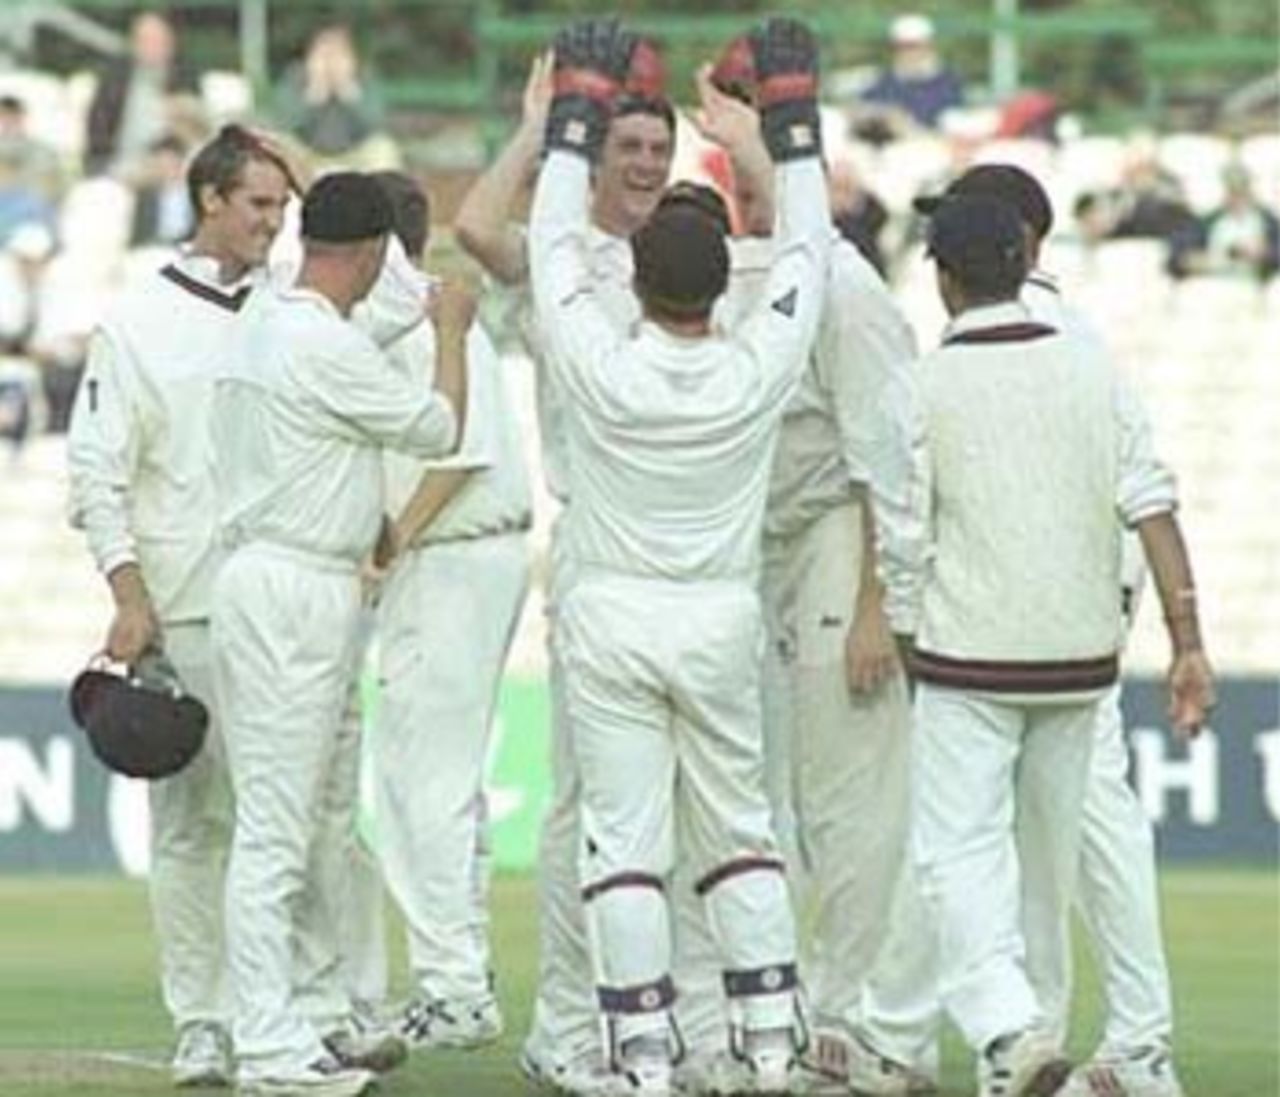 Mike Smethurst celebrates the wicket of Edward Smith, PPP healthcare County Championship Division One, 2000, Lancashire v Kent, Old Trafford, Manchester, 17-20 August 2000(Day 1).